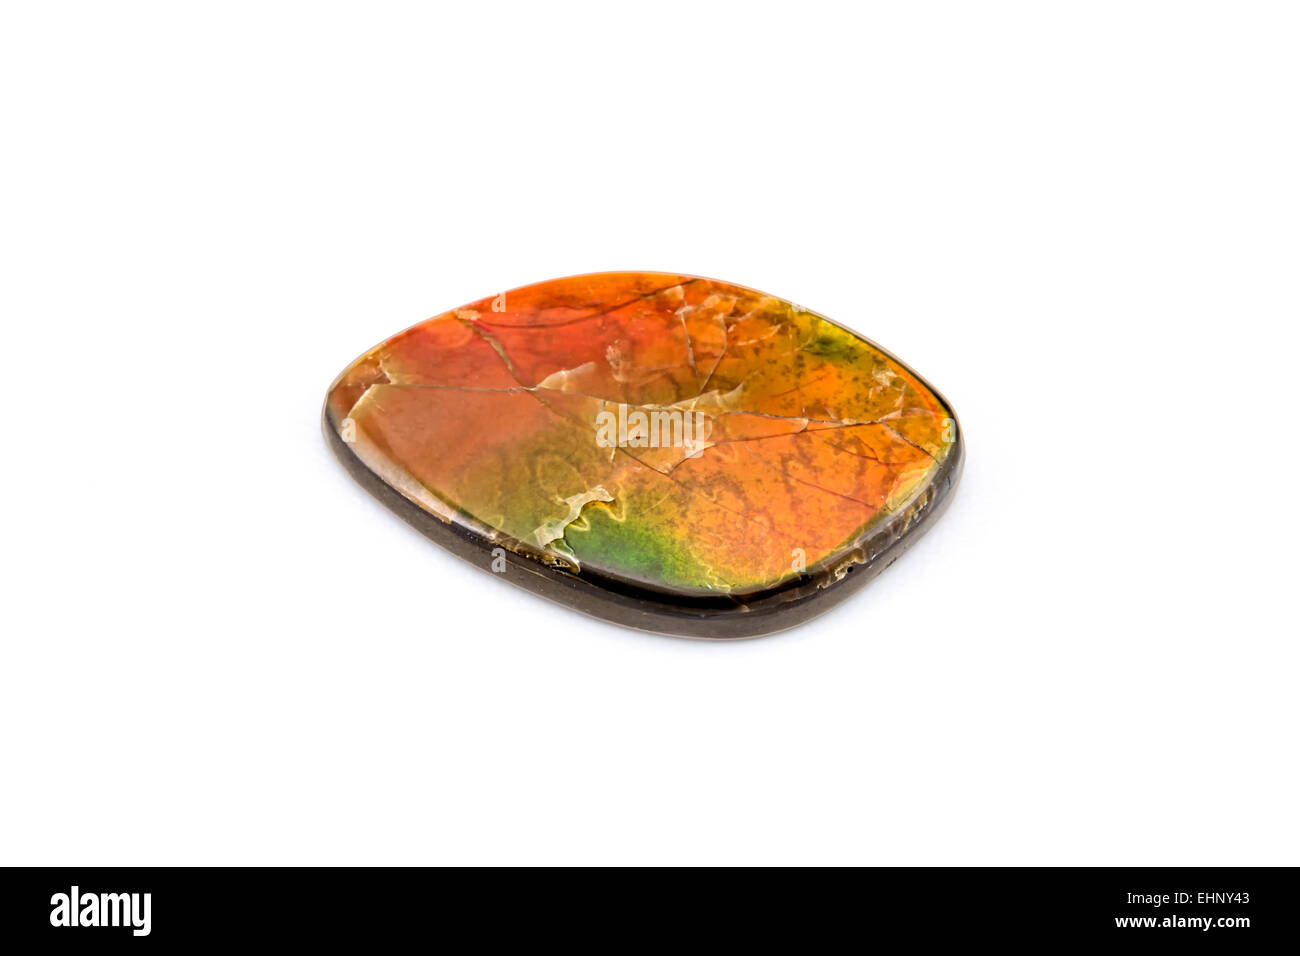 Lumachella or 'fire marble' is a rare iridescent marble composed of fossilized clam and snail shells. Origin: Russia Stock Photo